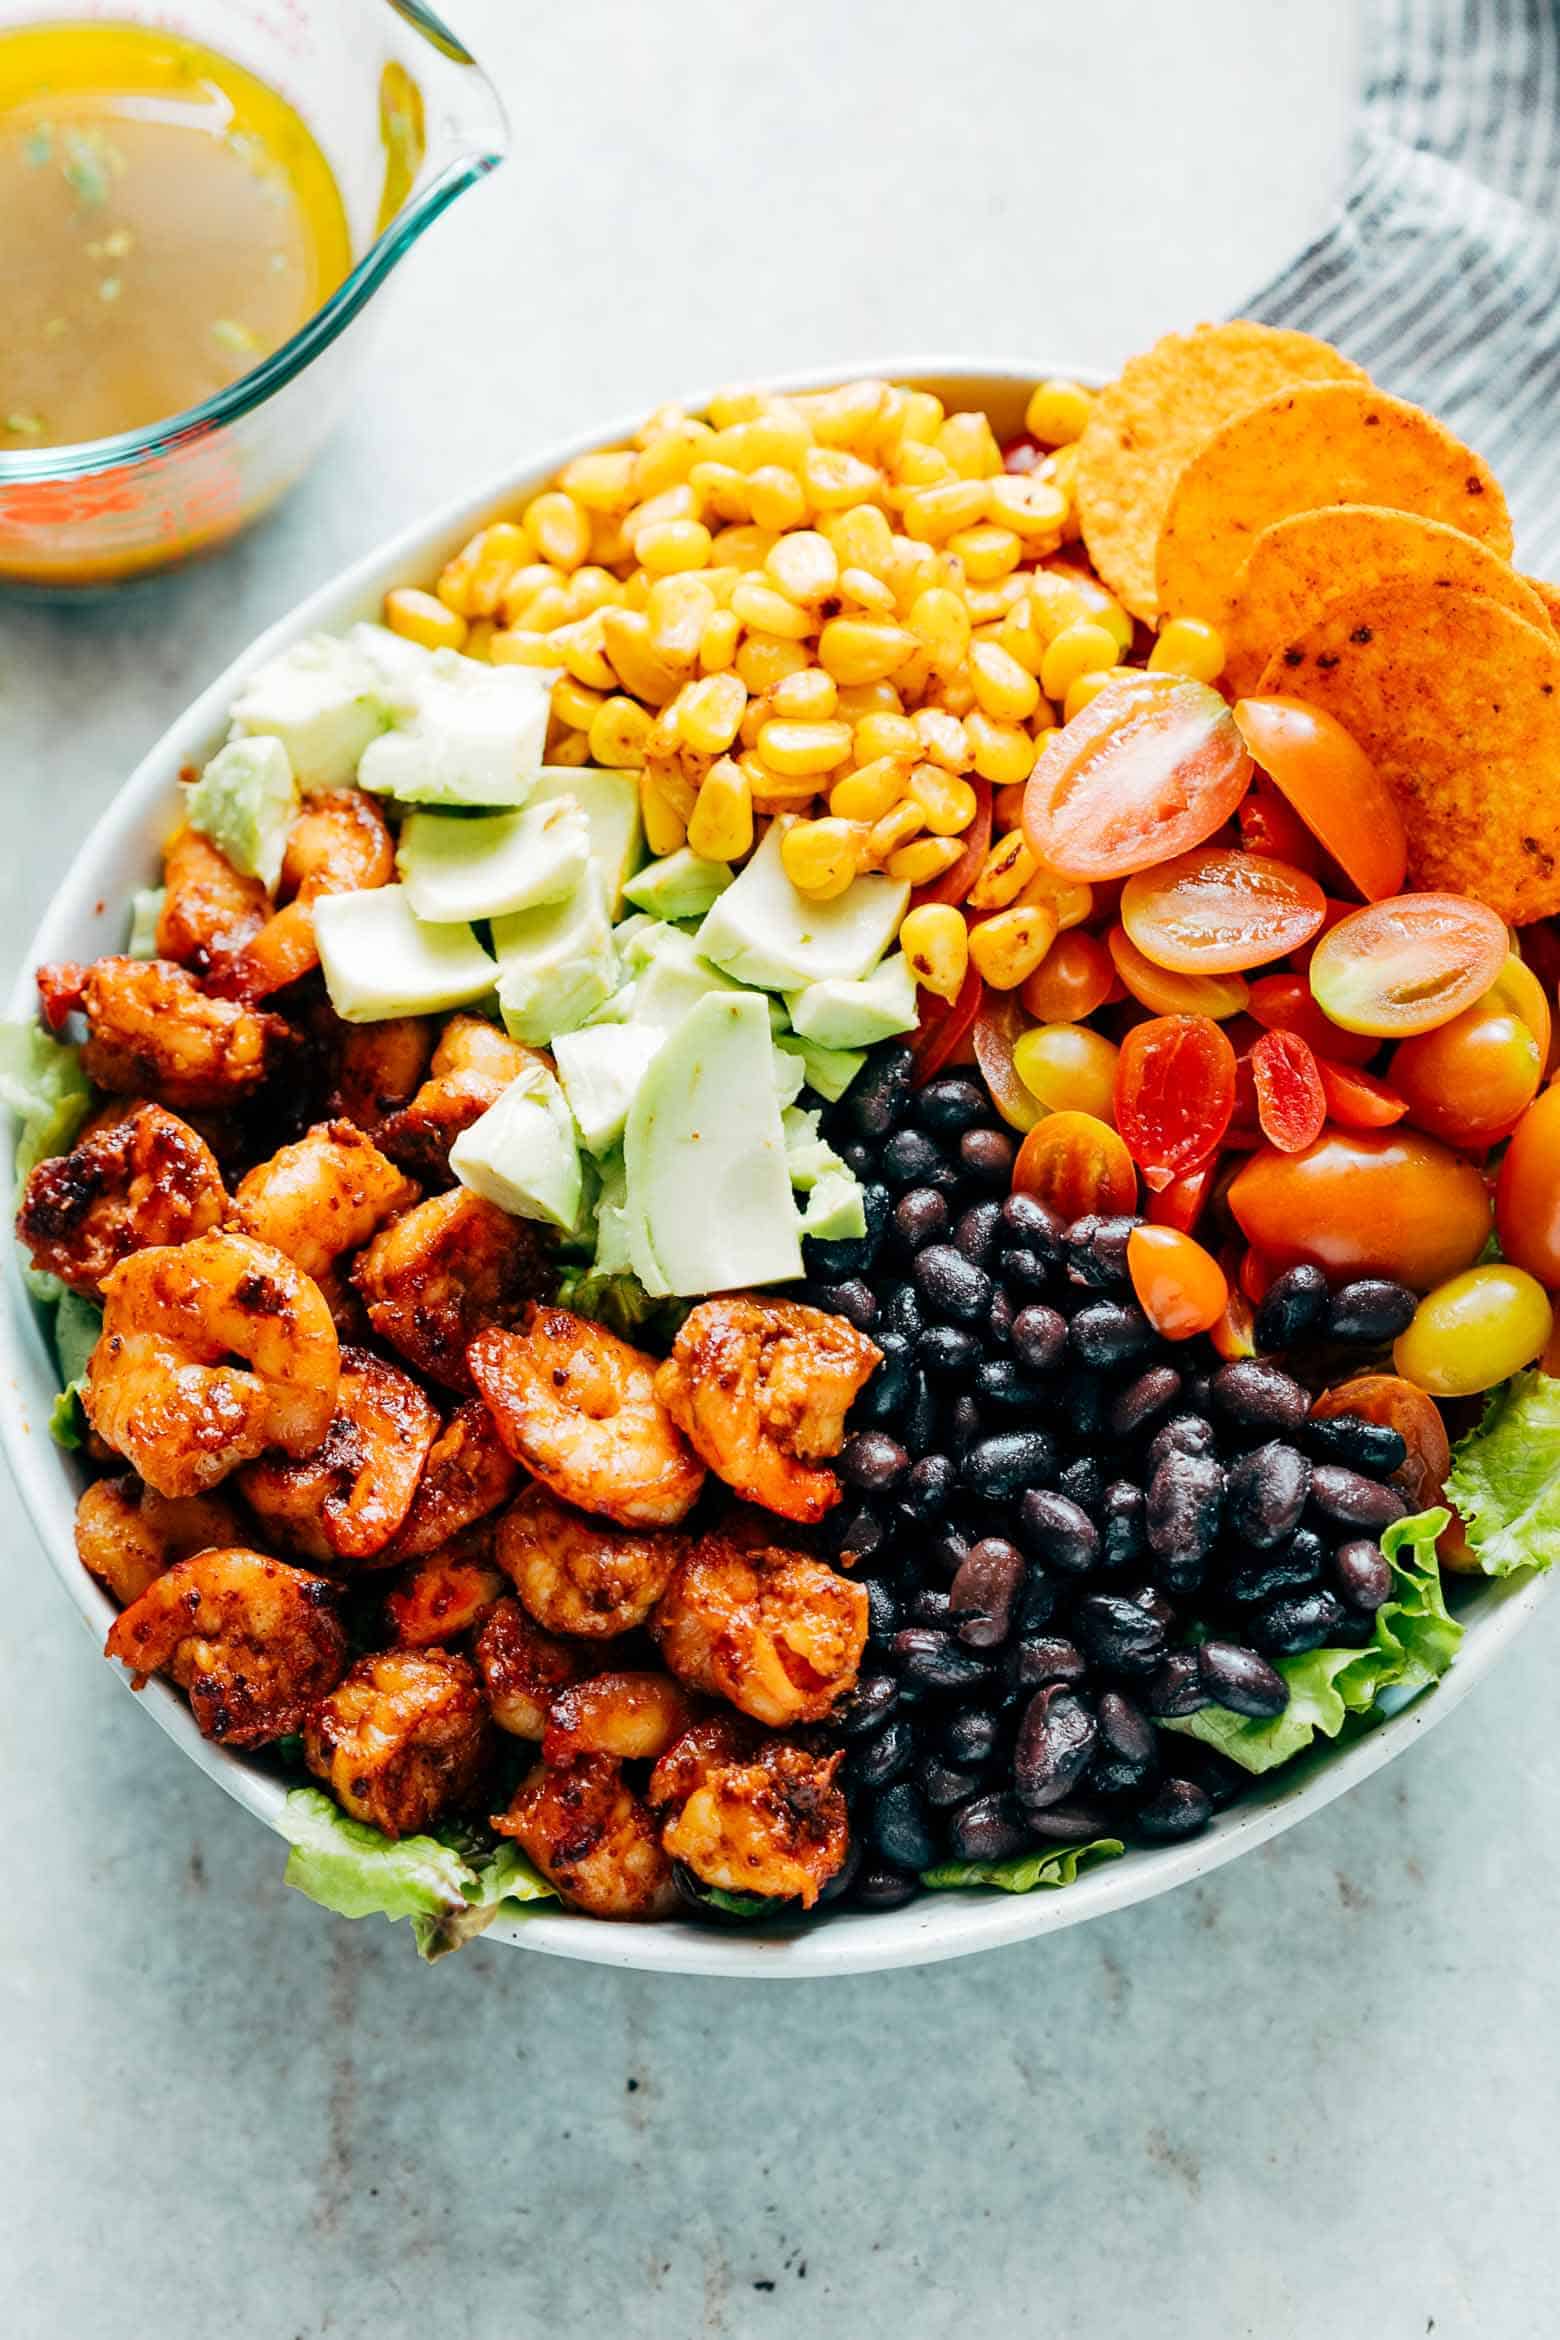 Mexican Prawn Avocado Taco Salad is a delicious, hearty salad that has all the flavours of your favourite mexican taco, but healthier. Loaded with lettuce, black beans, avocado, cherry tomatoes and a delicious cilantro lime dressing, it's perfect when you want salad for dinner.